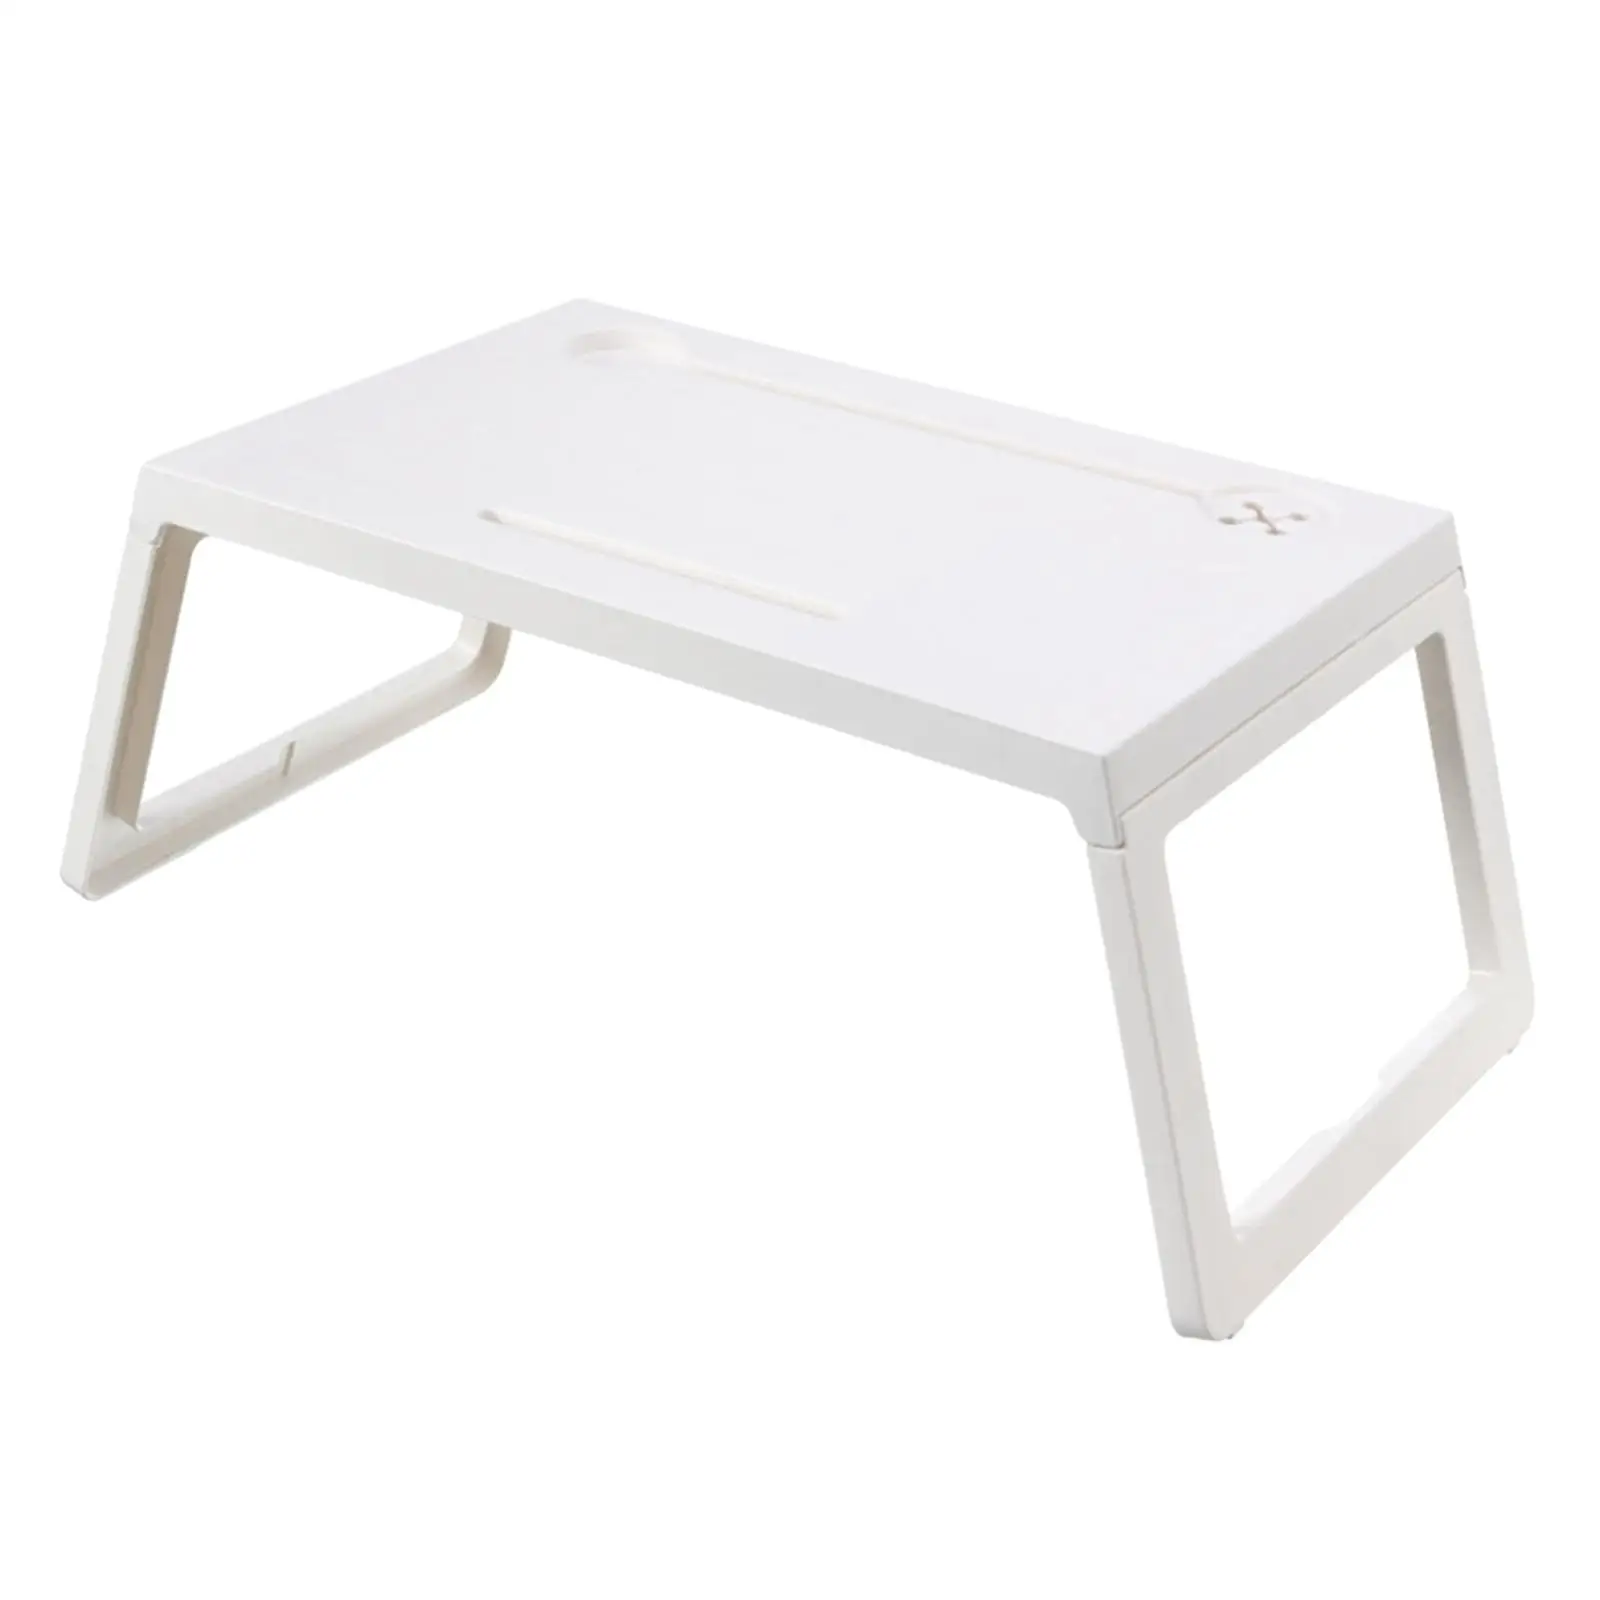 Foldable Laptop Table Breakfast Tray lap Tray Table Serving Bed Tray Bed Stand for Lawn Bed Reading Watching Floor Table